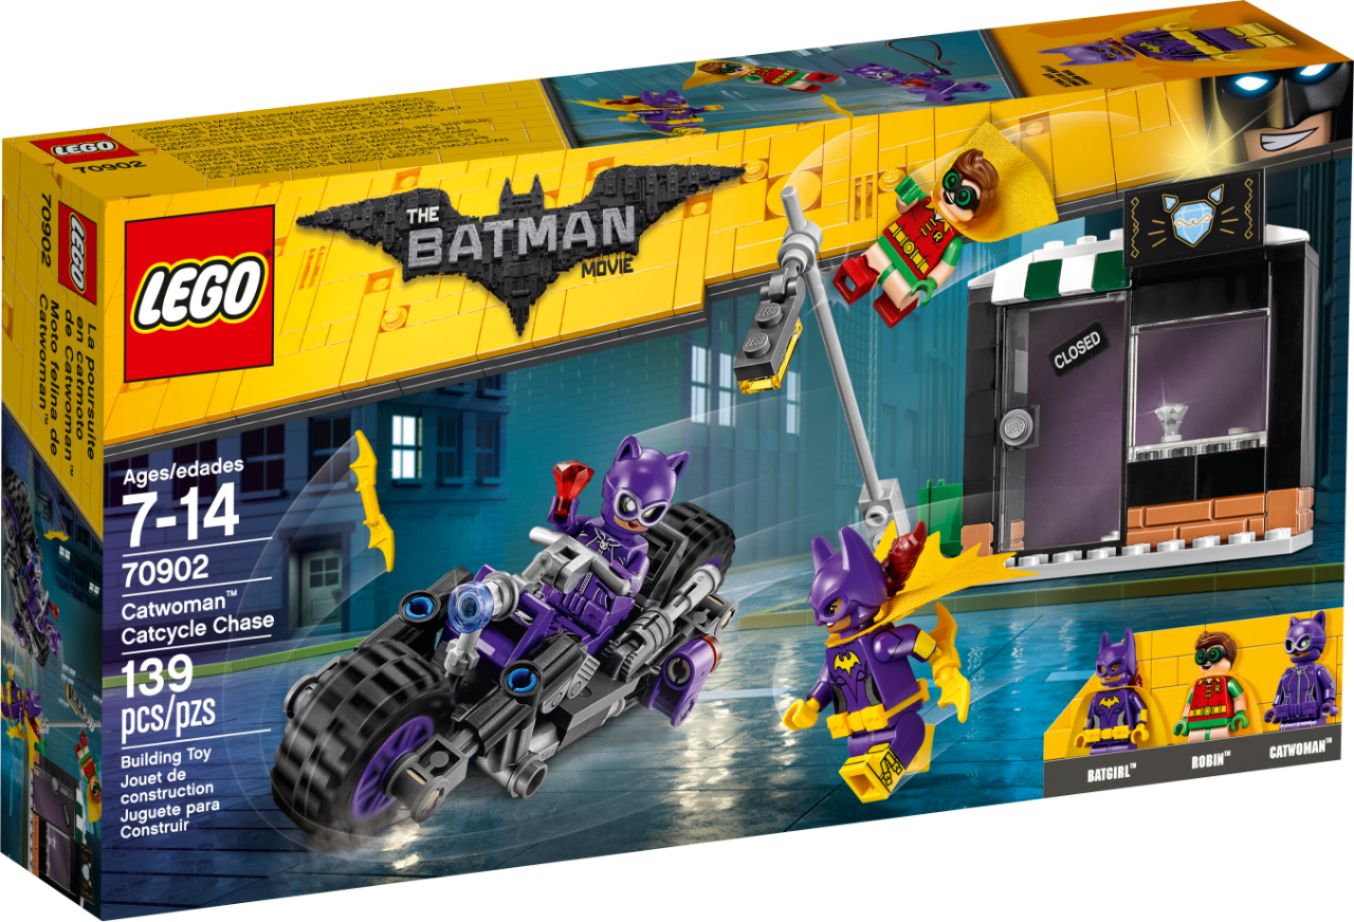 The LEGO Batman Movie Catwoman Catcycle Chase 70902 6175852 - Best